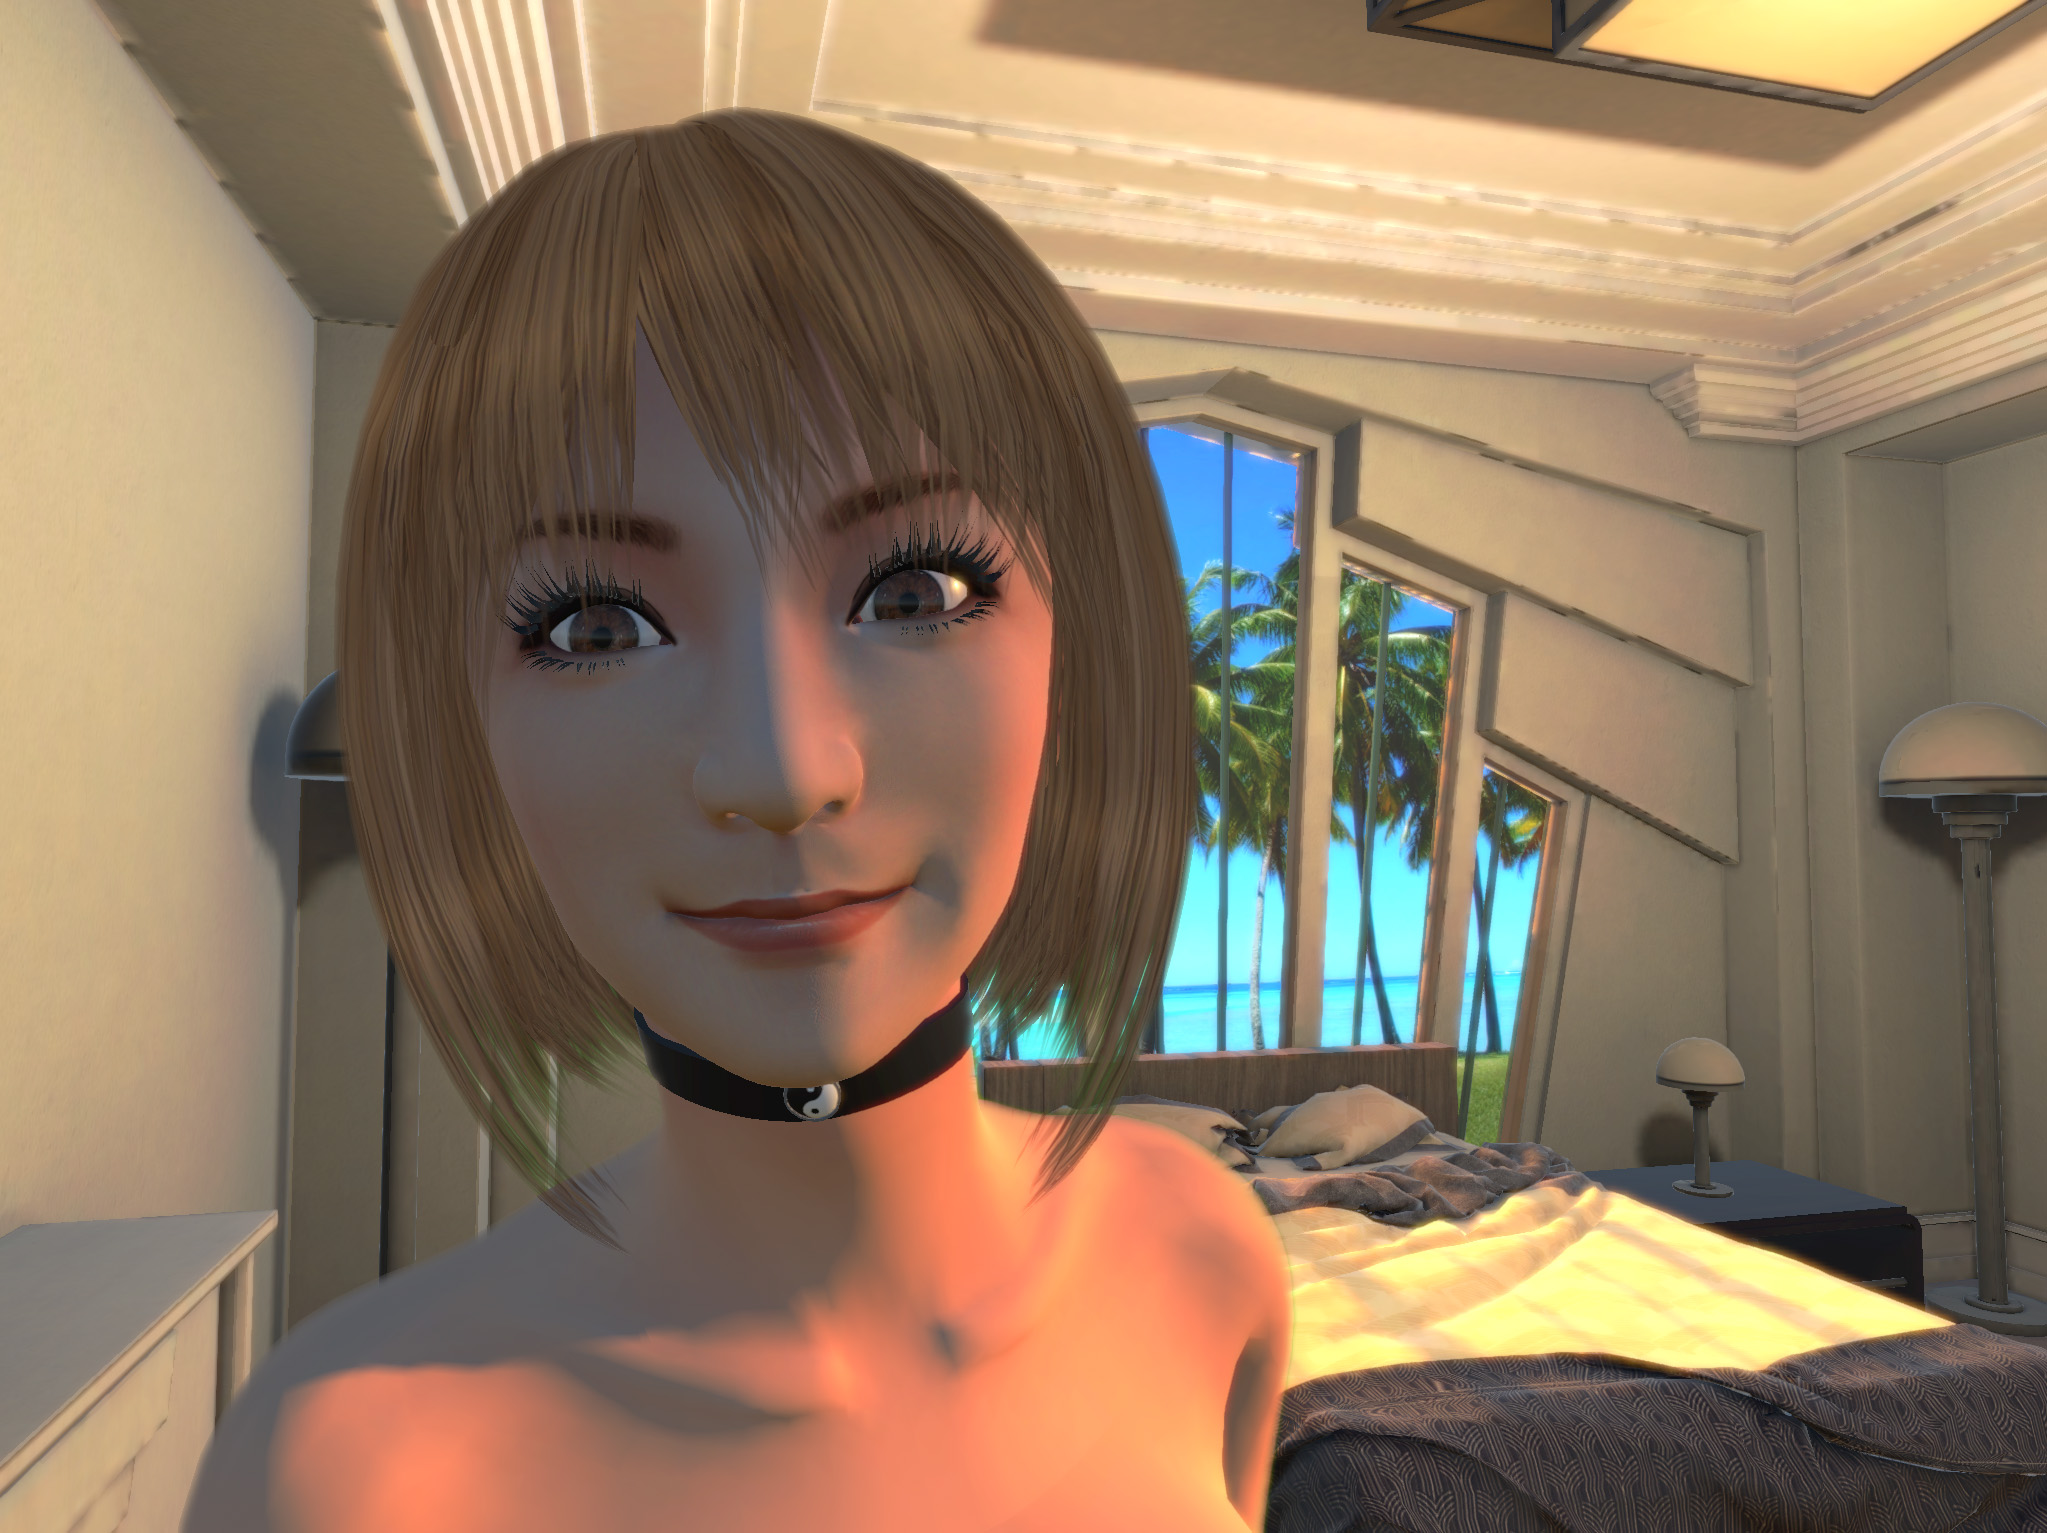 Citor Entertainment Studio Has Launched The Beachousex Virtual Reality Adult Game For Oculus Rift